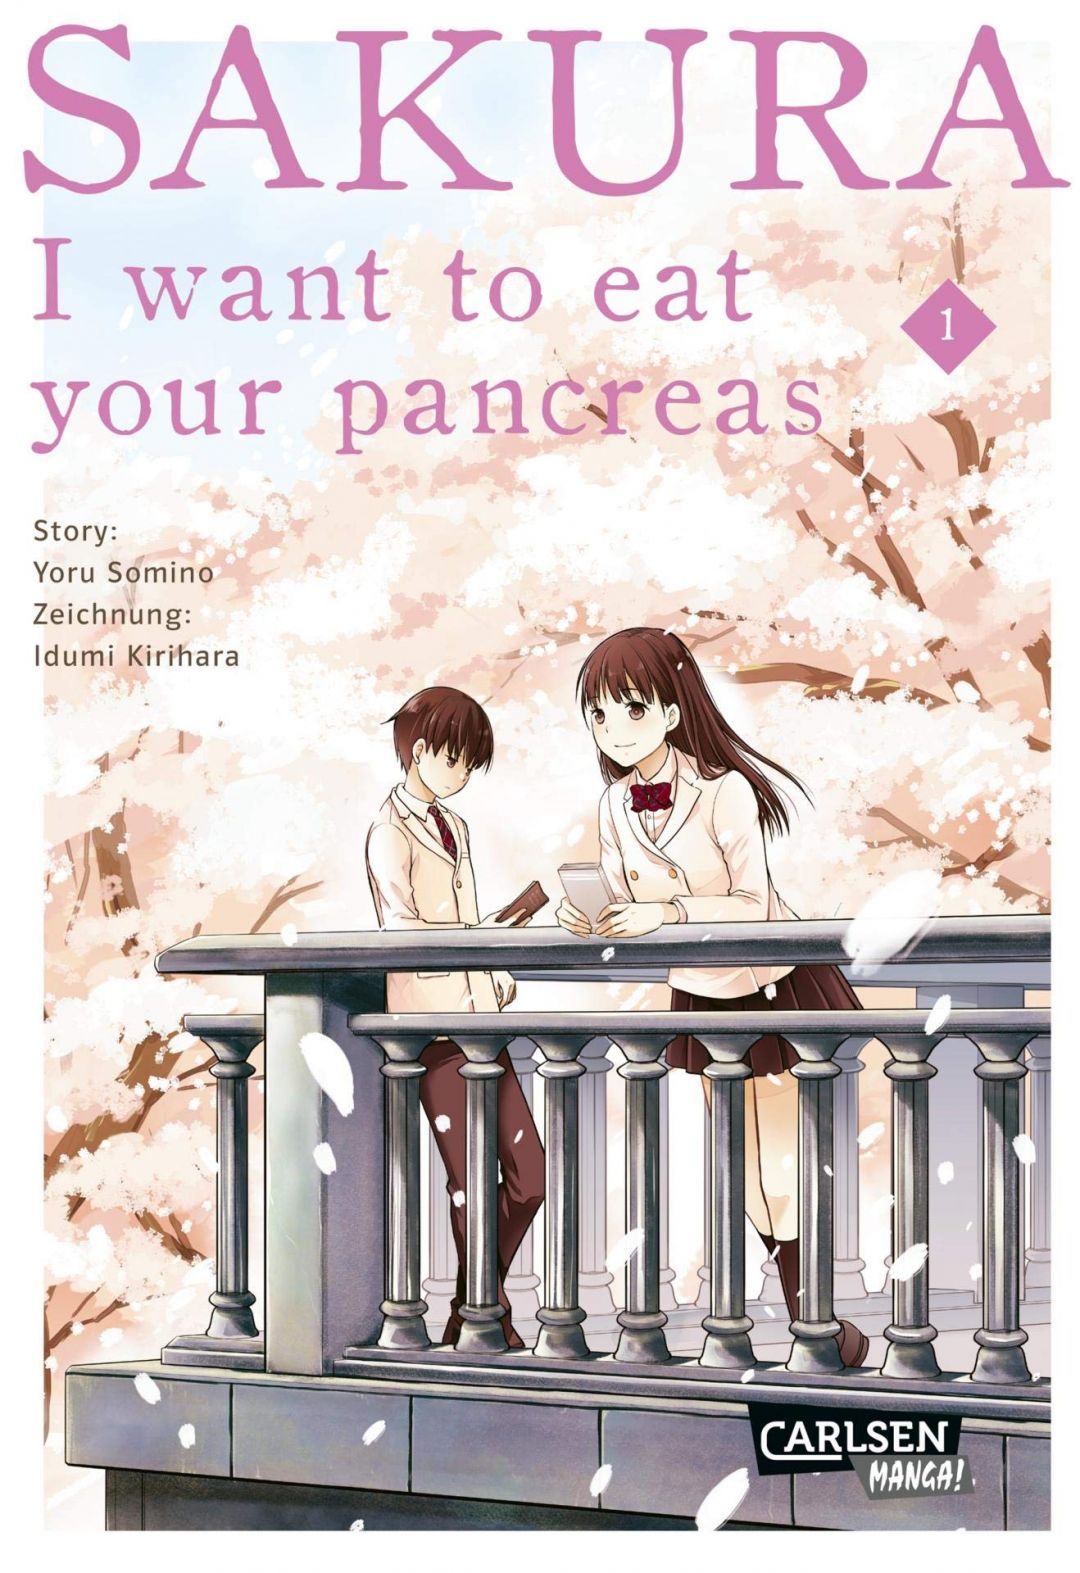 I Want To Eat Your Pancreas - Want To Eat Your Pancreas , HD Wallpaper & Backgrounds